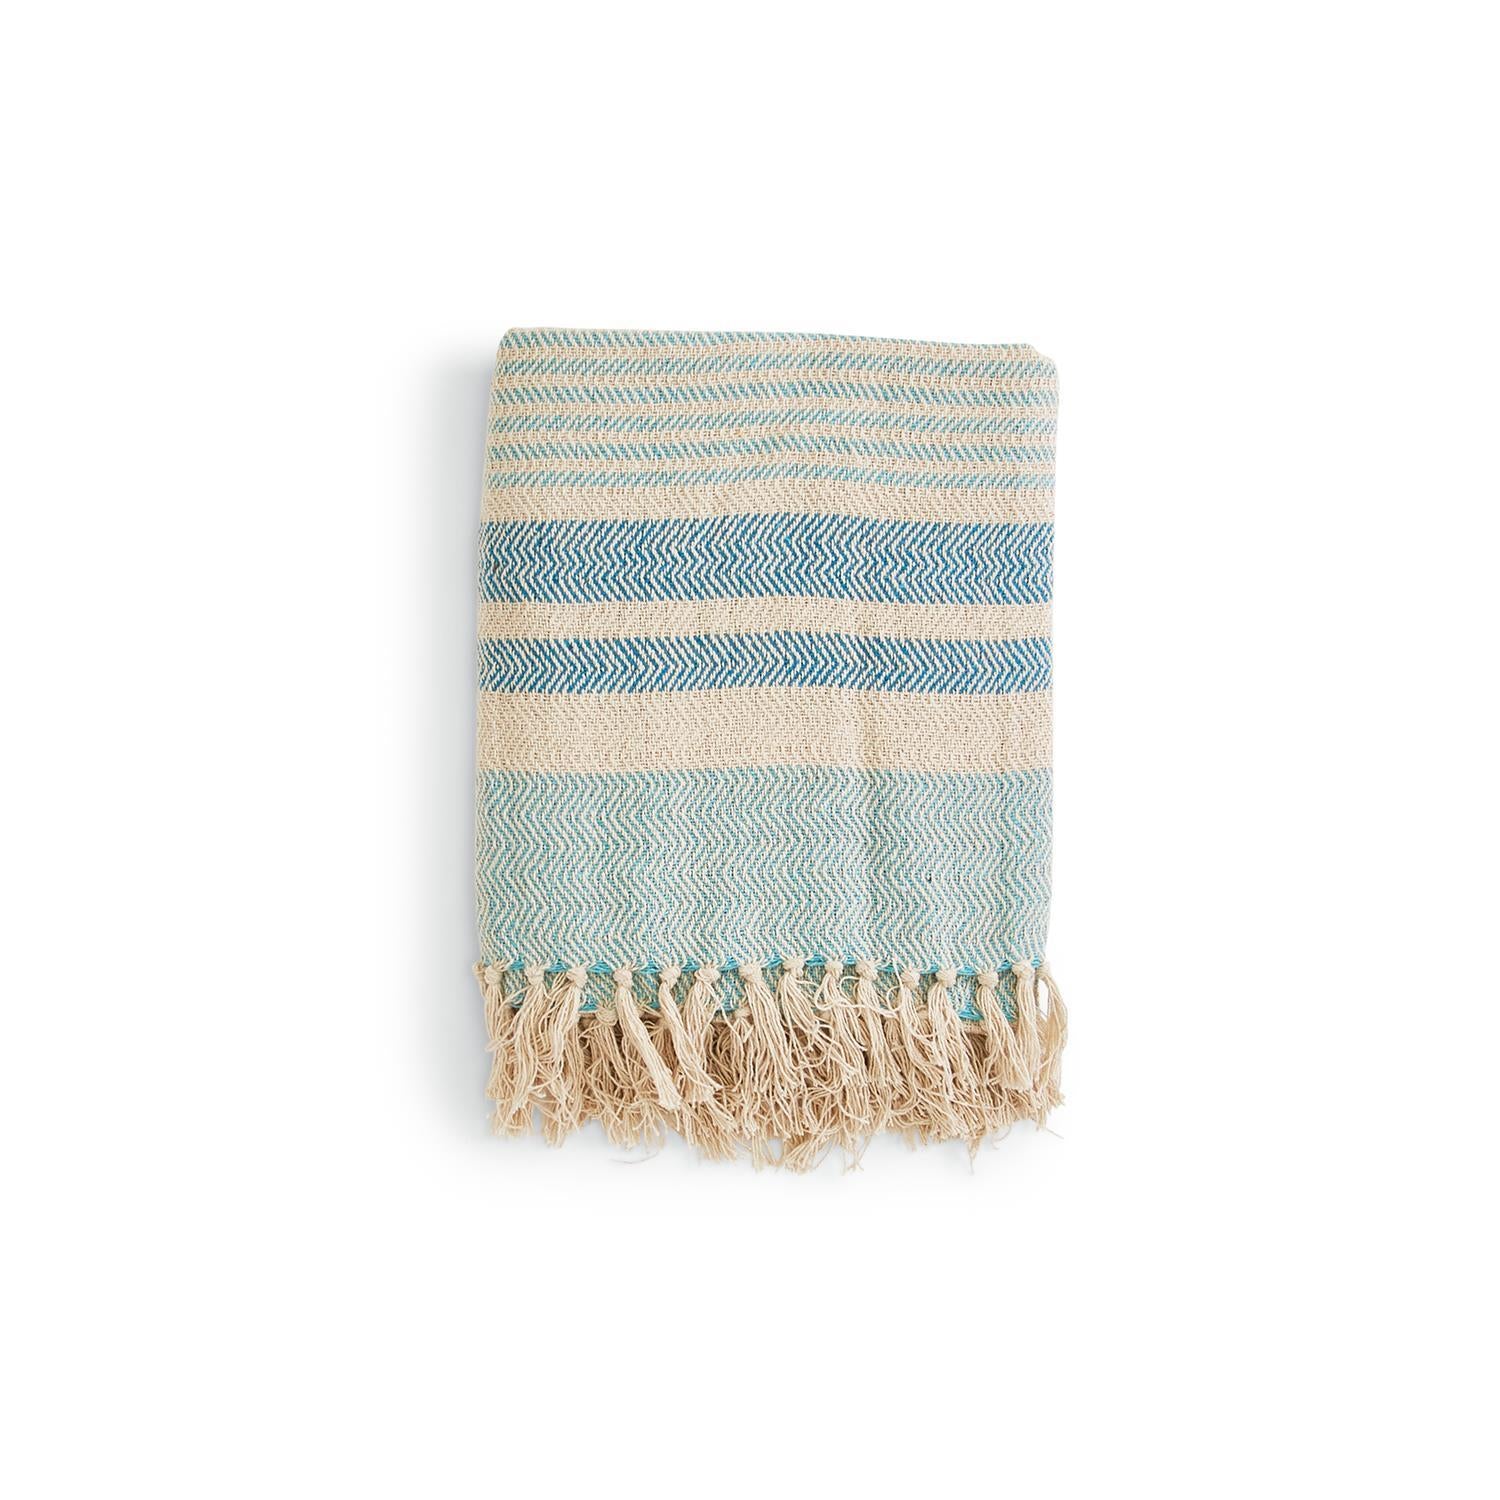 Striped Throw with Fringe, Asst 2 Designs